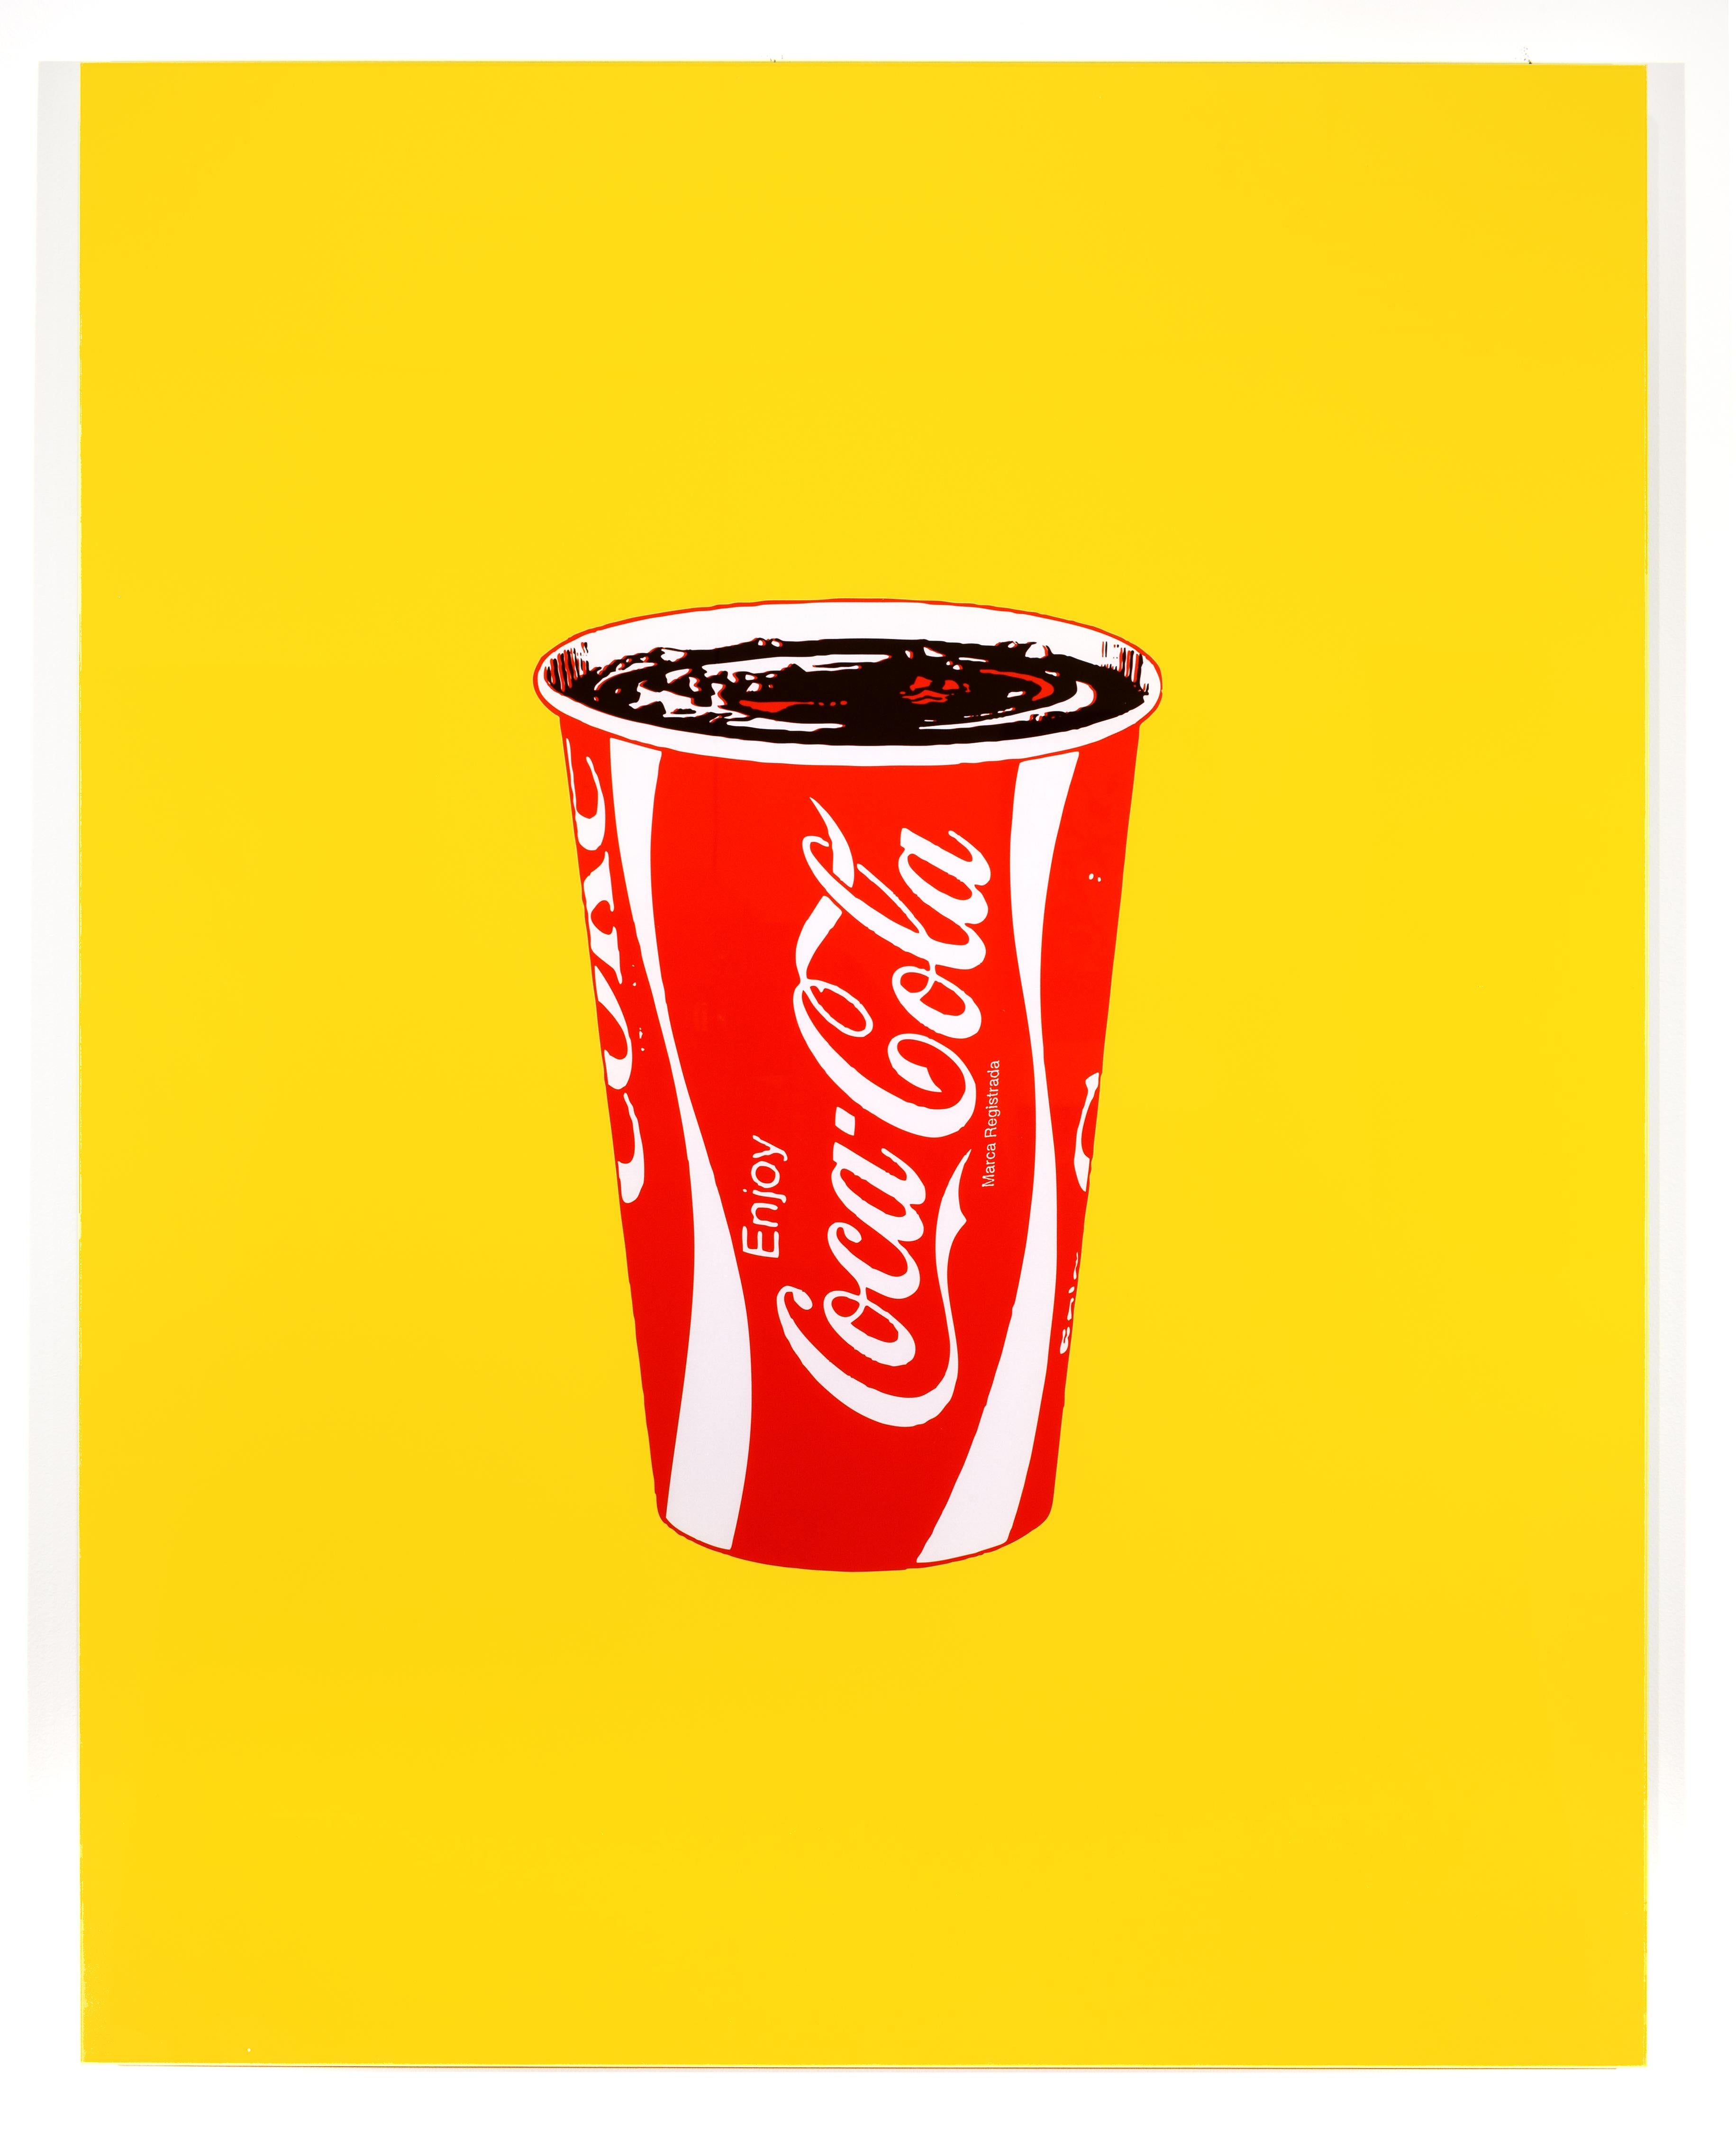 What is the official drink of the pandemic? Is it Coke? If not, why not? - Print by Skylar Fein